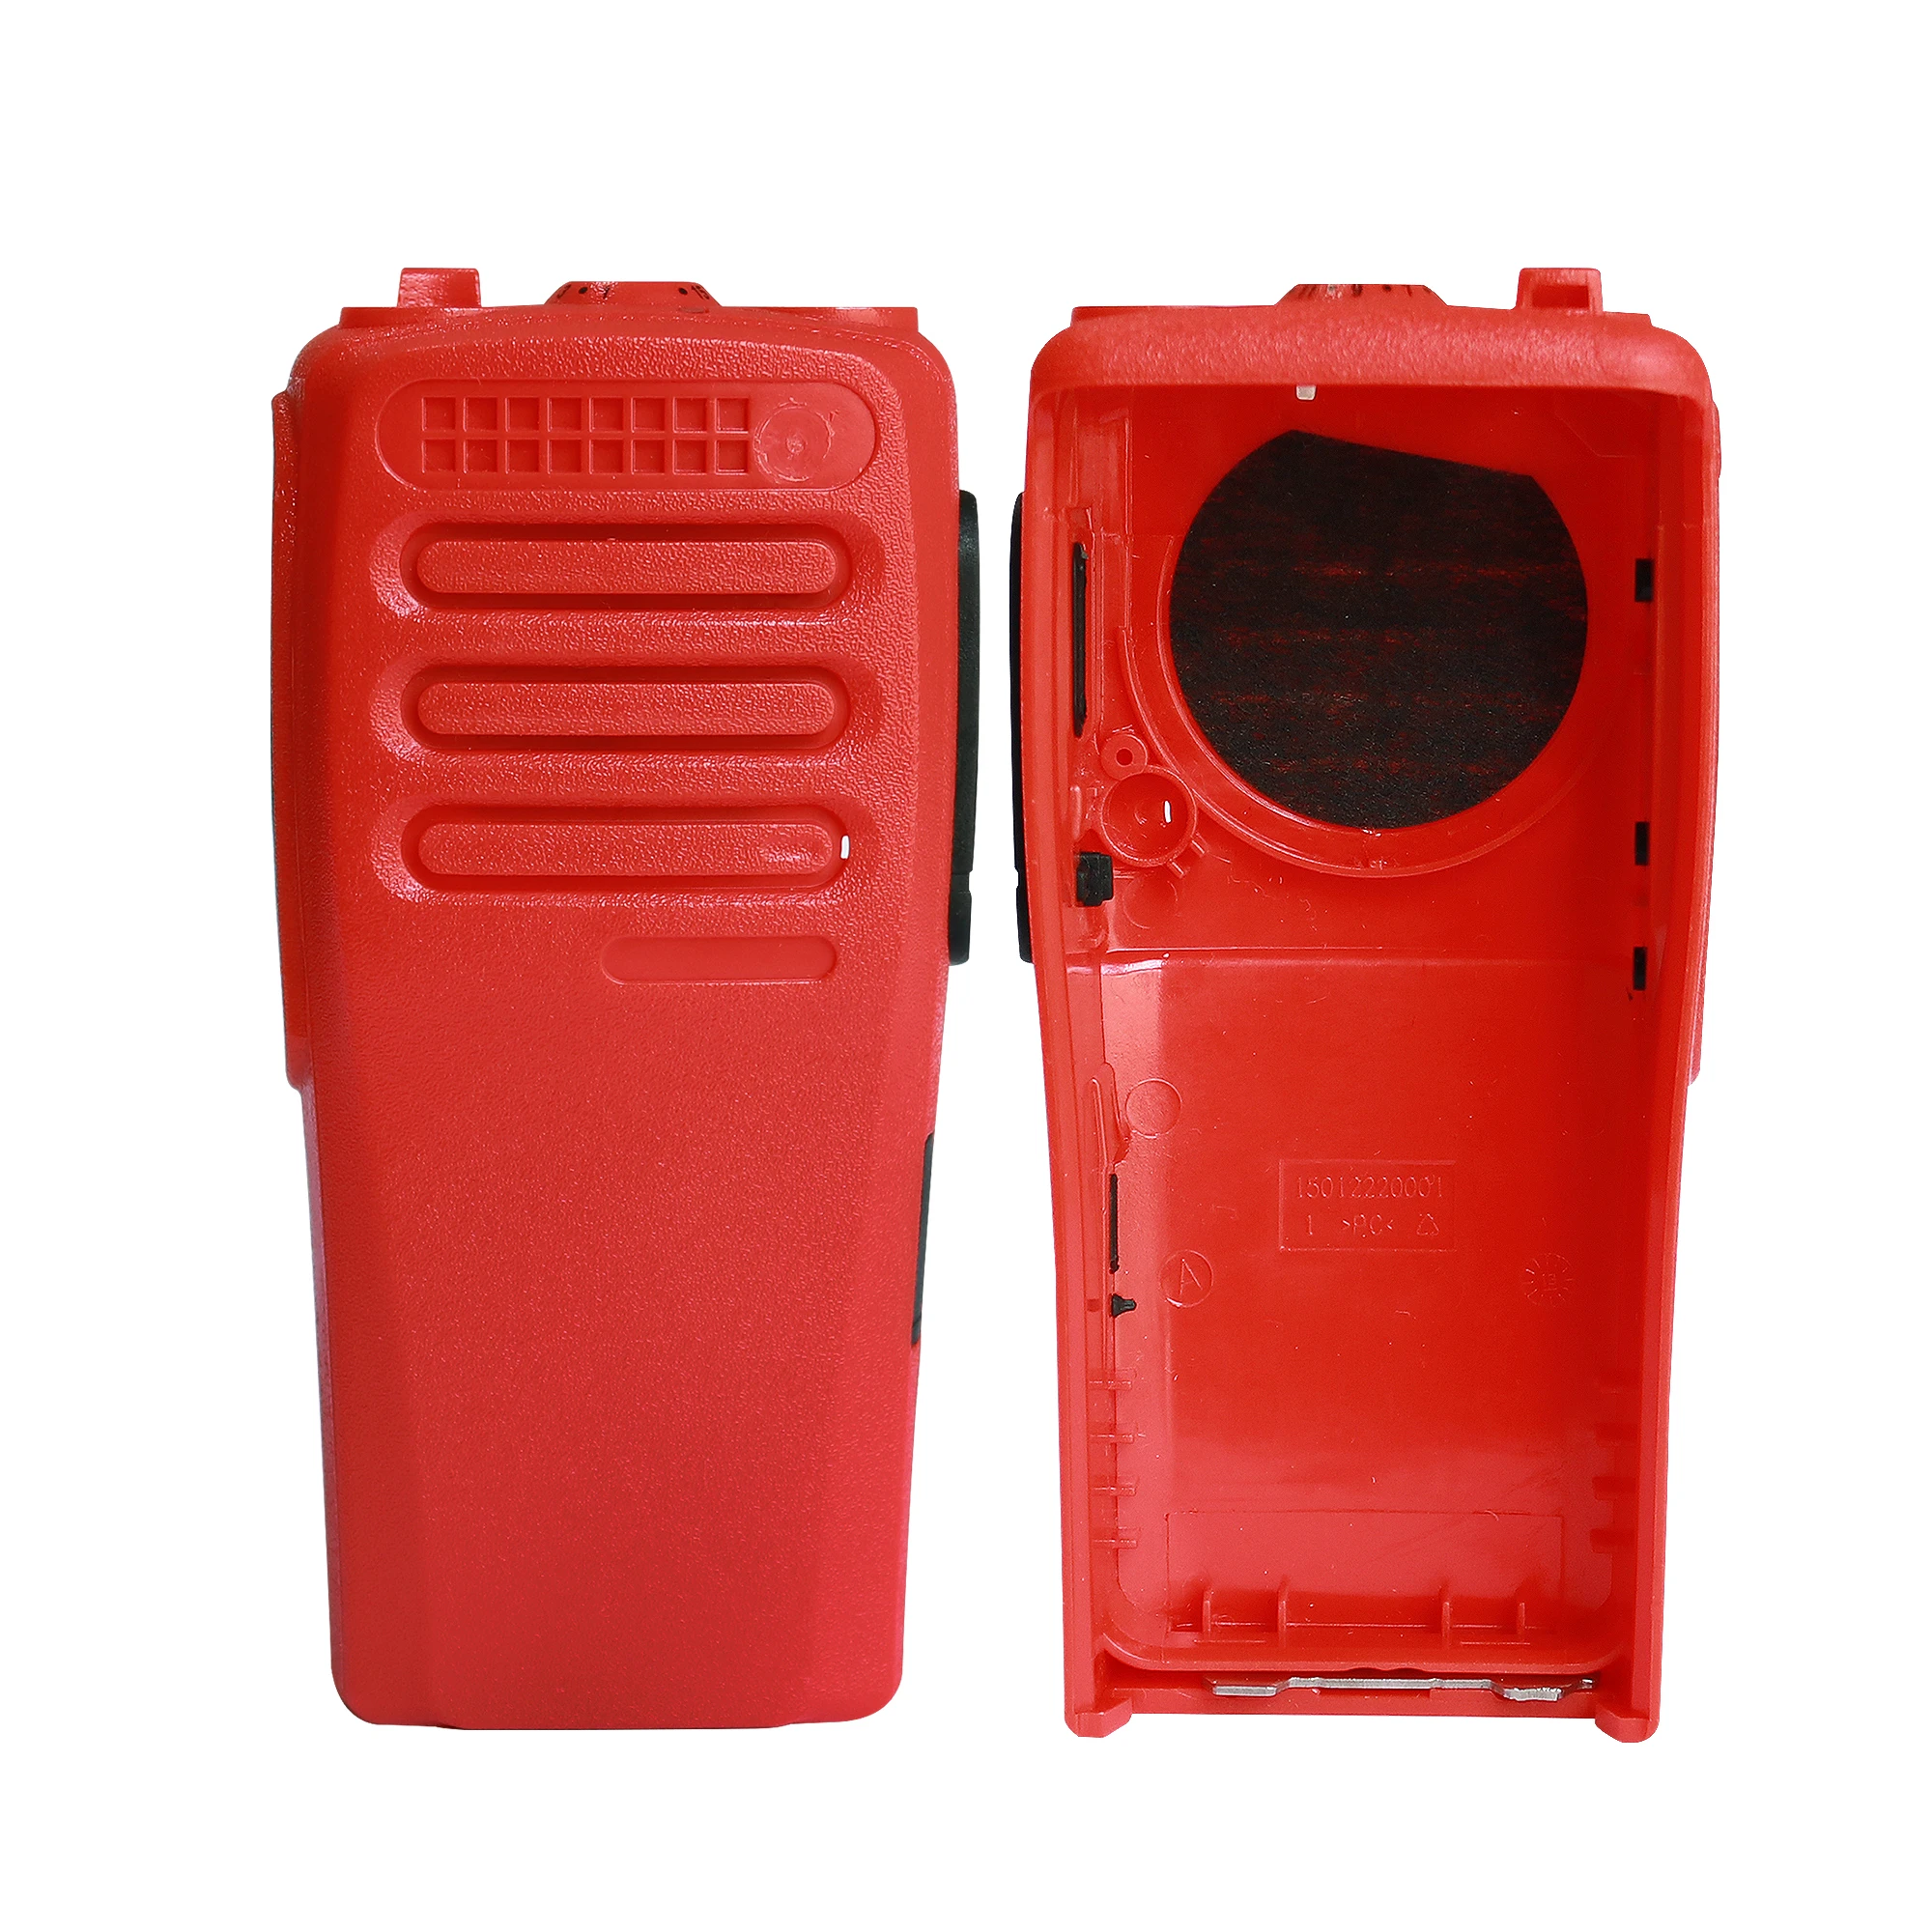 PMLN6345 Walkie Talkie Replacement Housing Case For MOTOROLA CP200D Two Way Radio Red